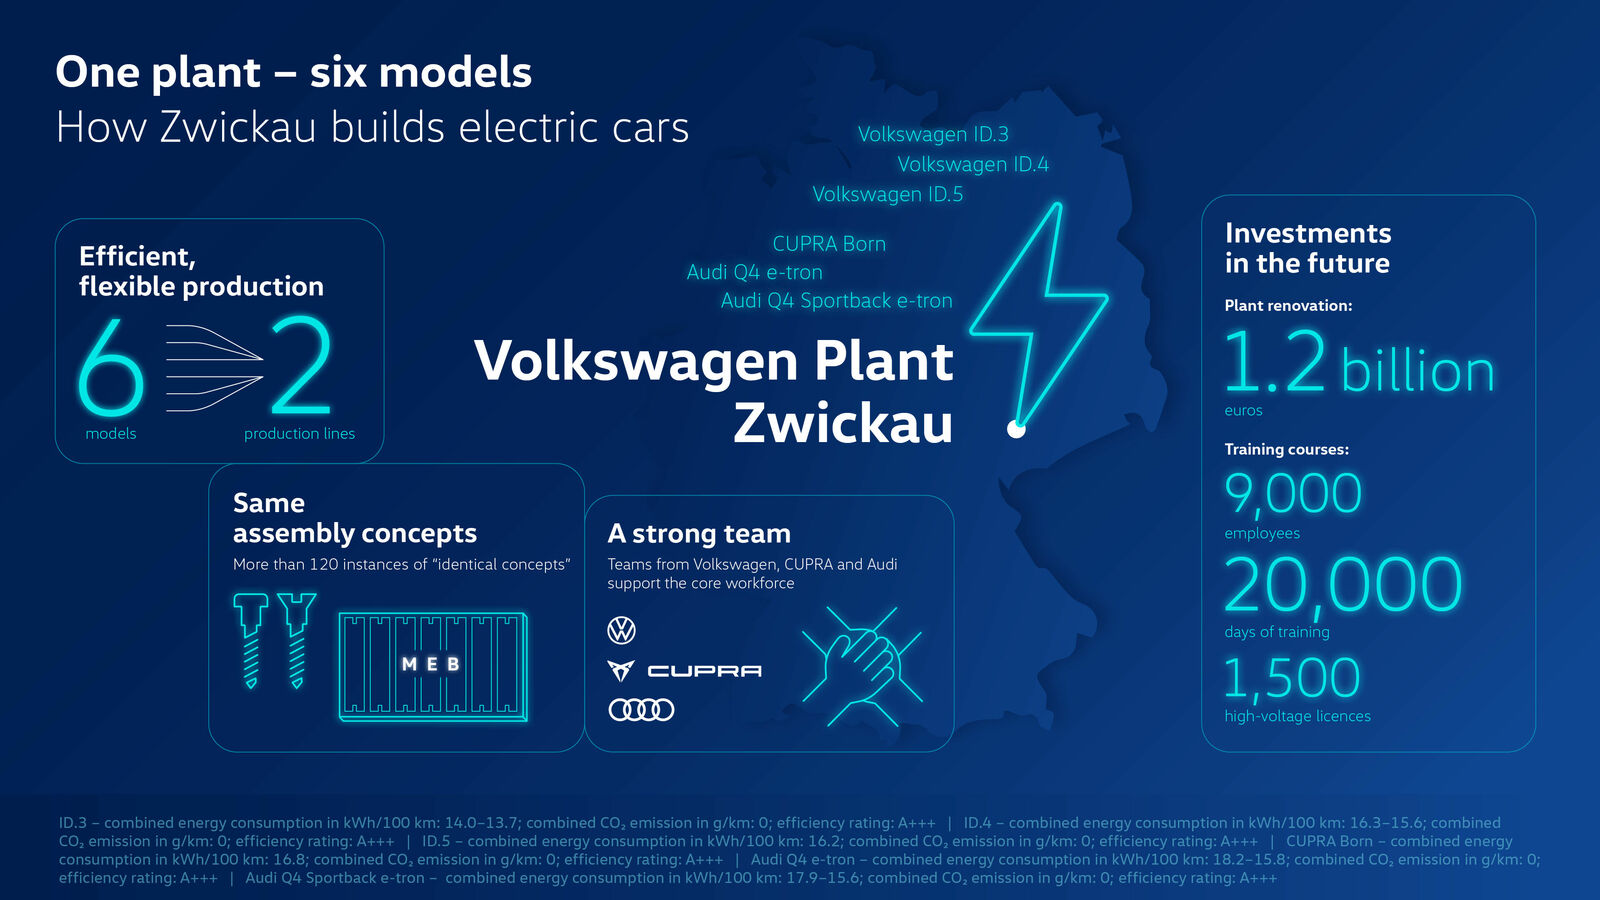 One plant – six models: How Zwickau builds electric cars